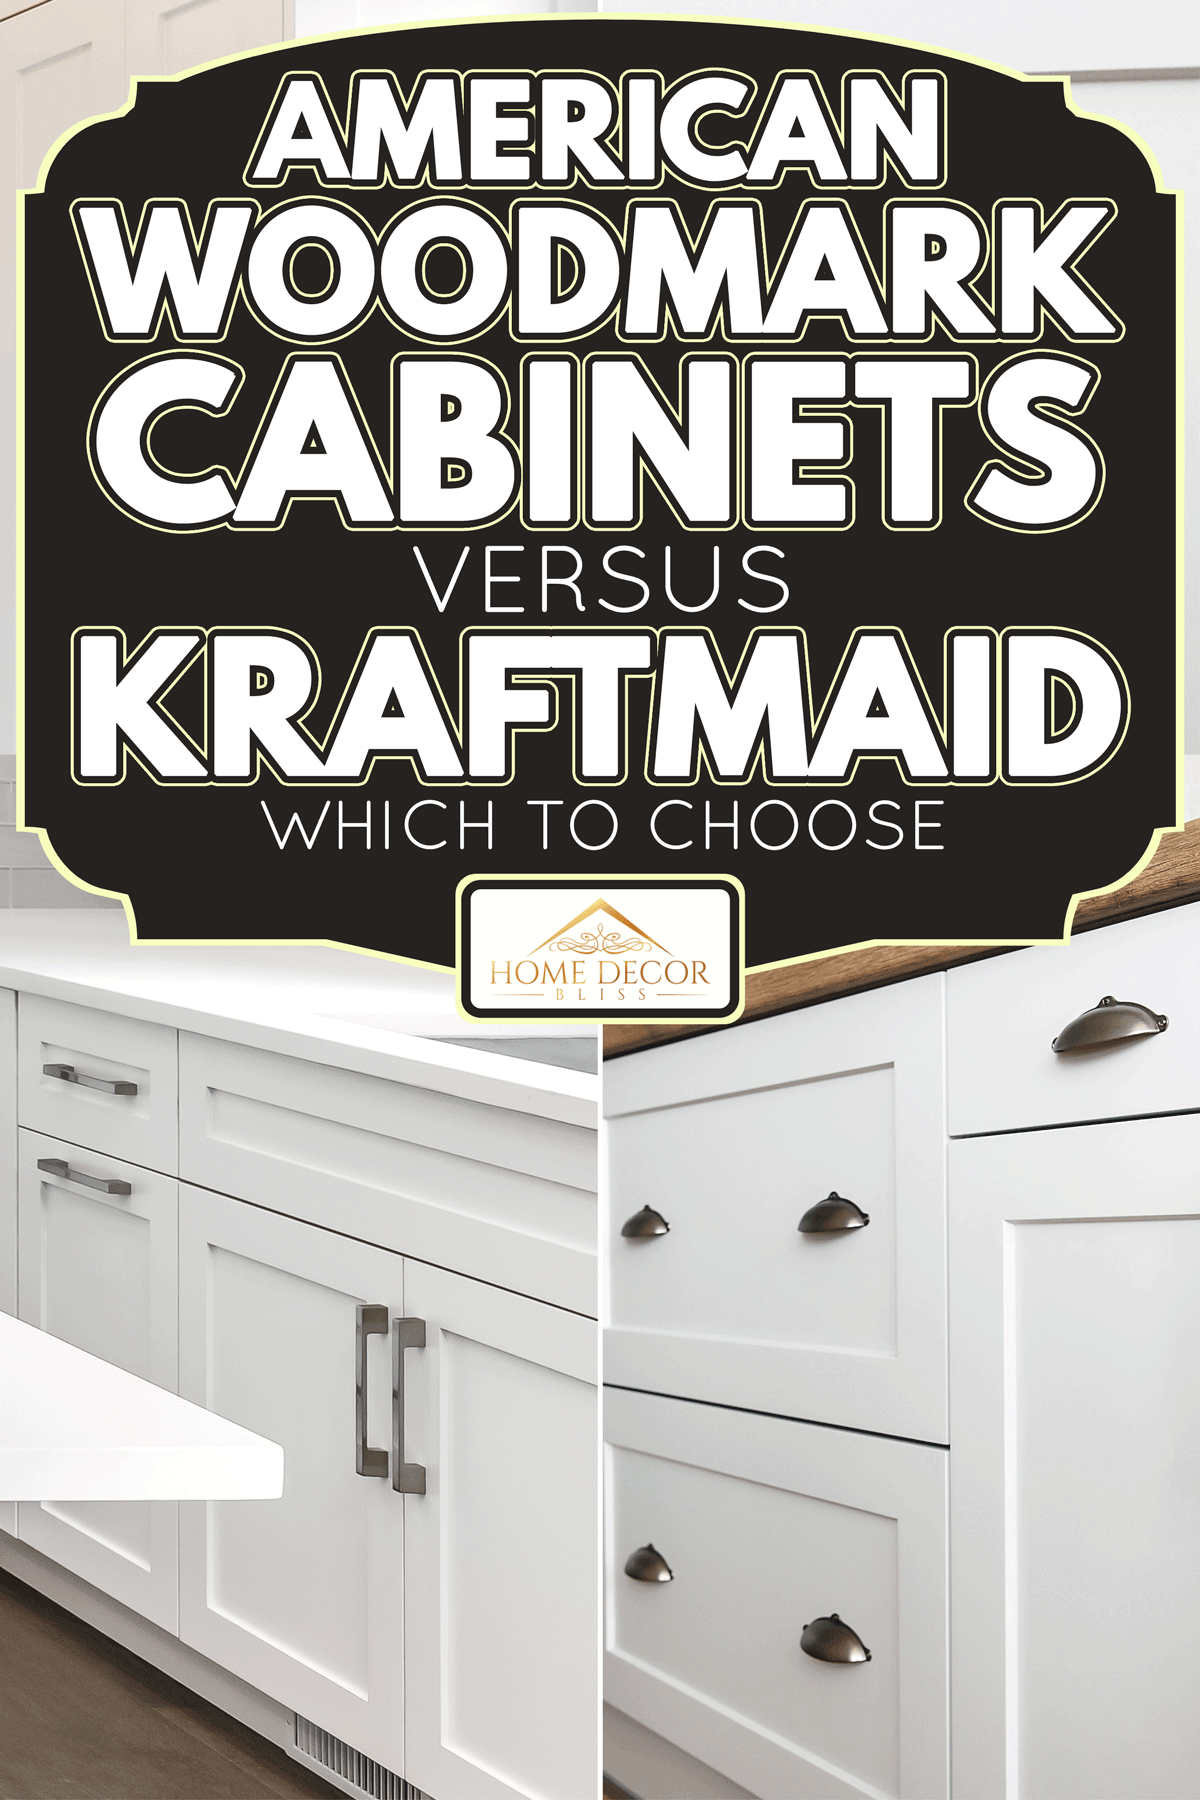 American Woodmark Cabinets Vs Kraftmaid Which To Choose   Home ...